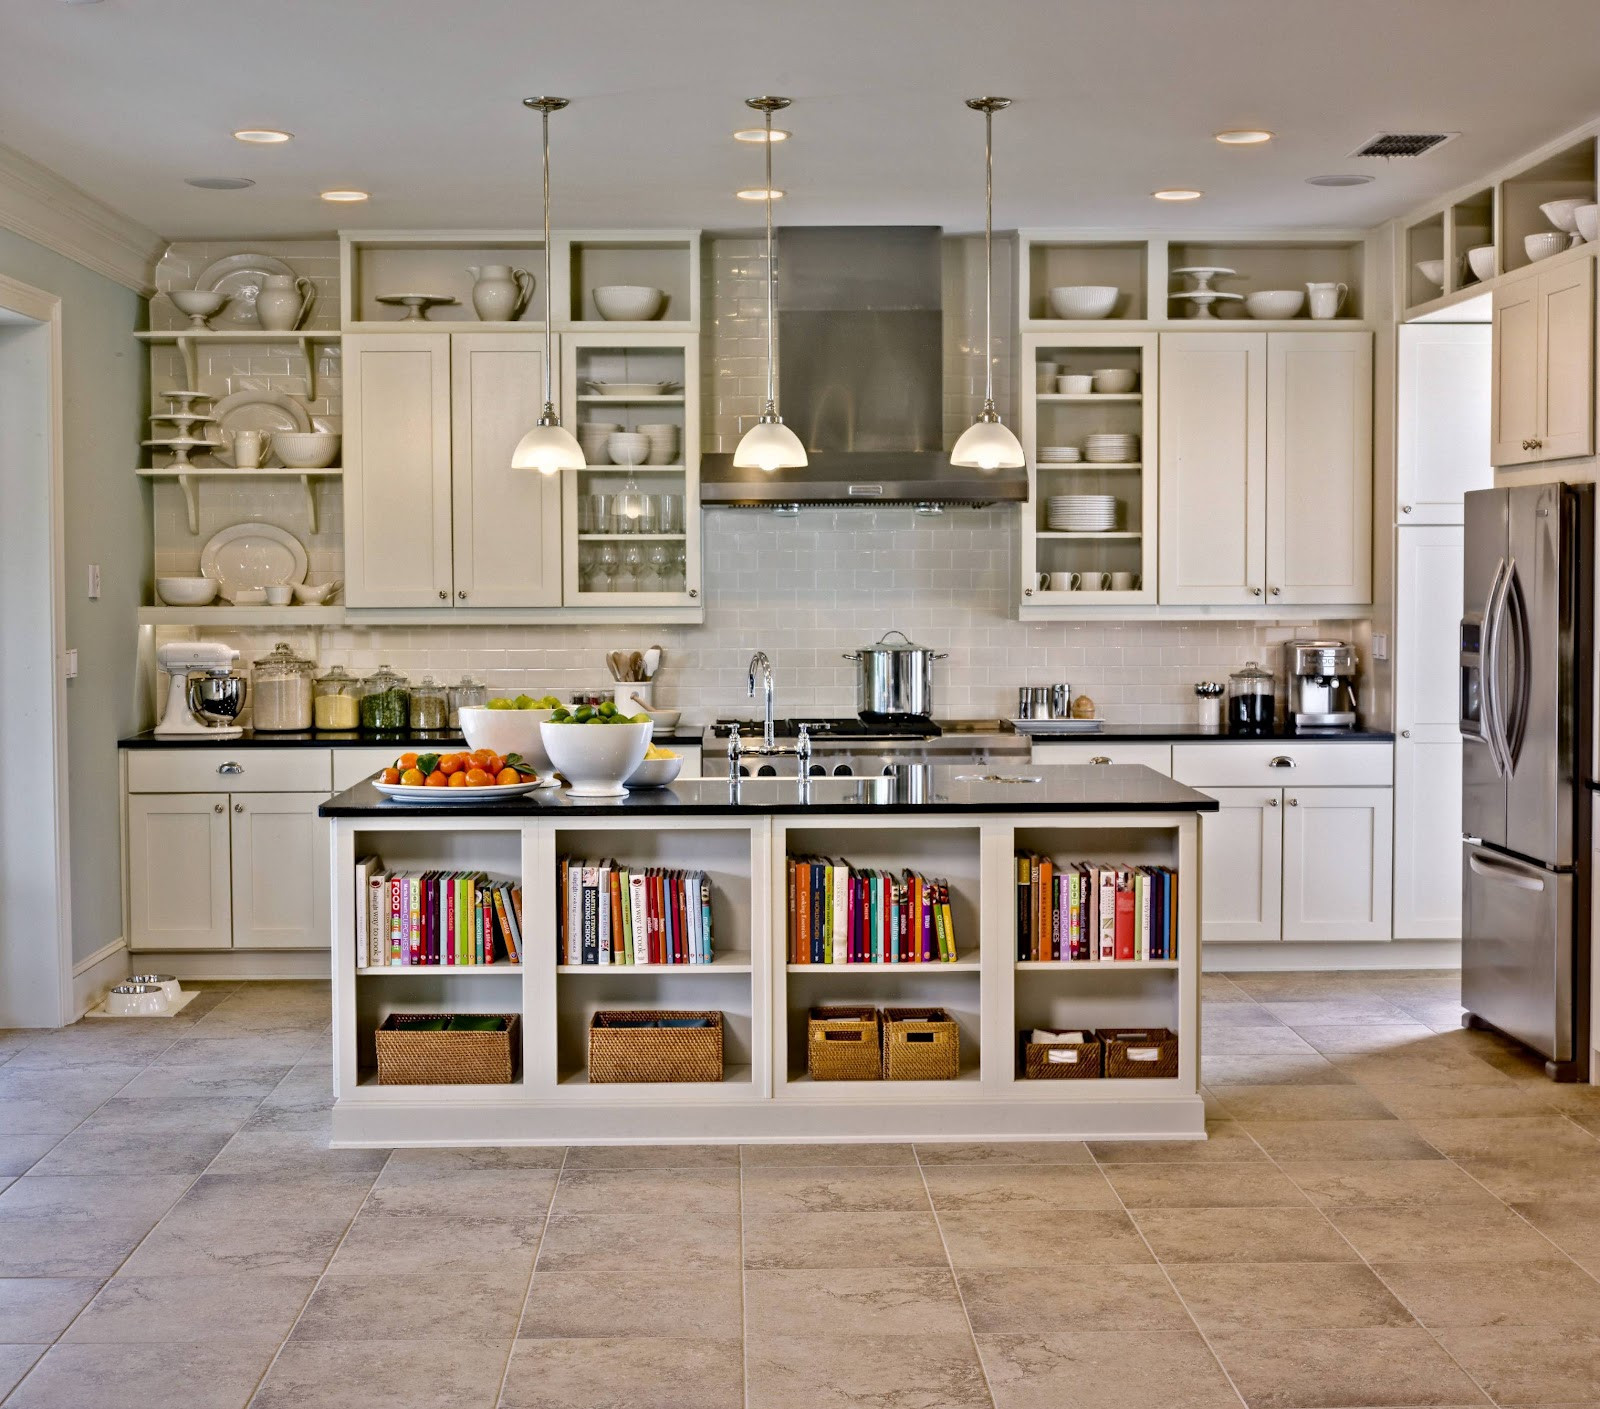 Ready To Assemble Kitchen Cabinets Lovely Kitchen Cabinets Of Ready To Assemble Kitchen Cabinets 